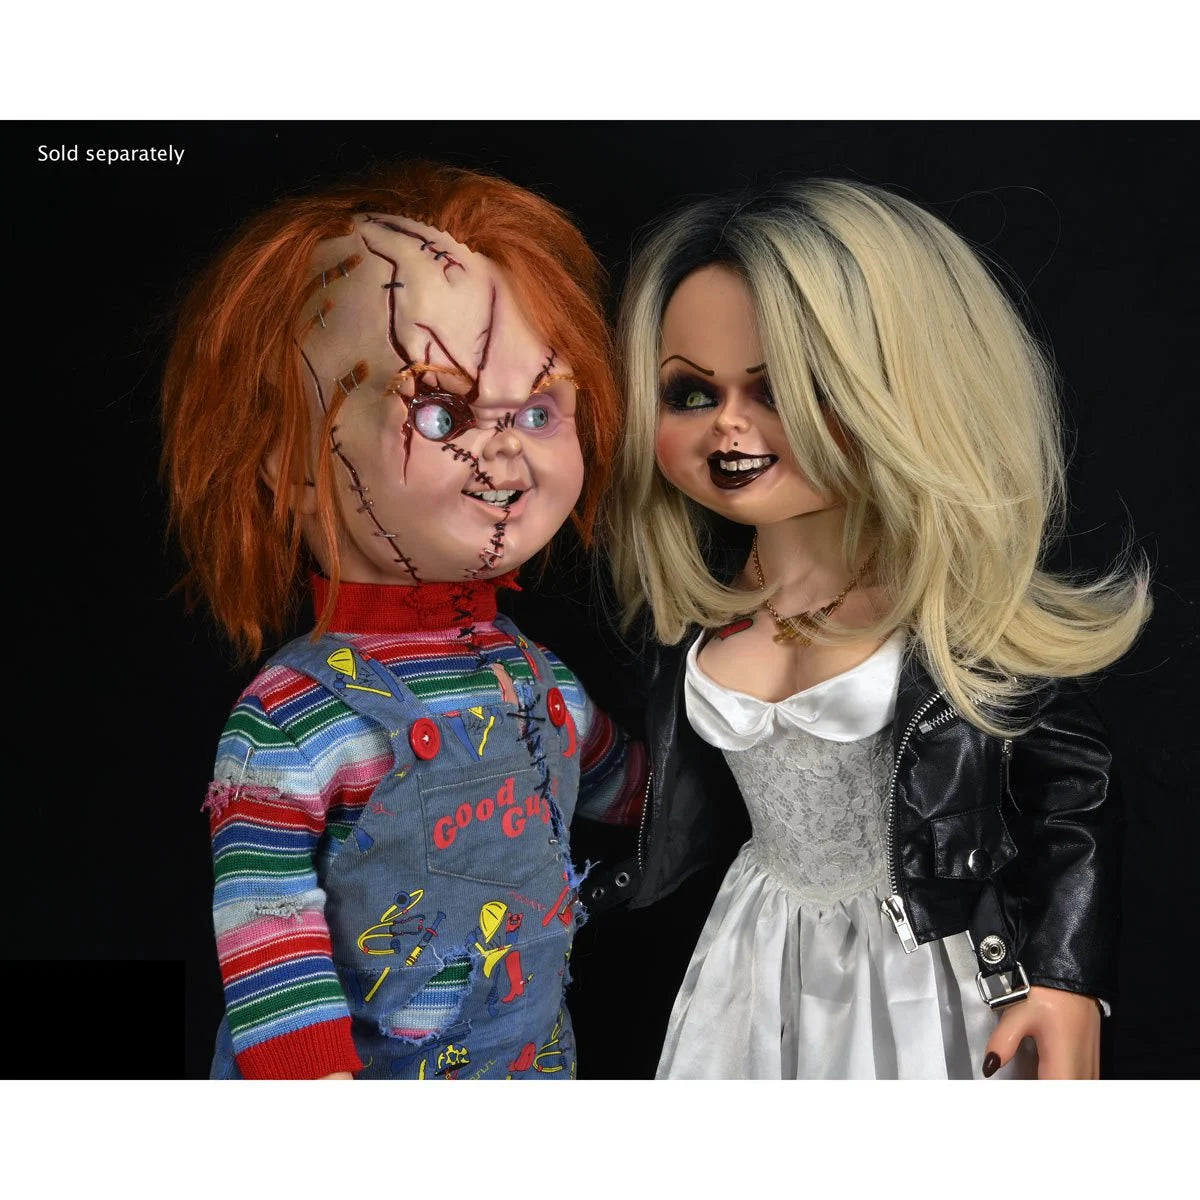 Child's Play Bride of Chucky Life-Size 1:1 Scale Replica - Hyperdrive Collector Zone